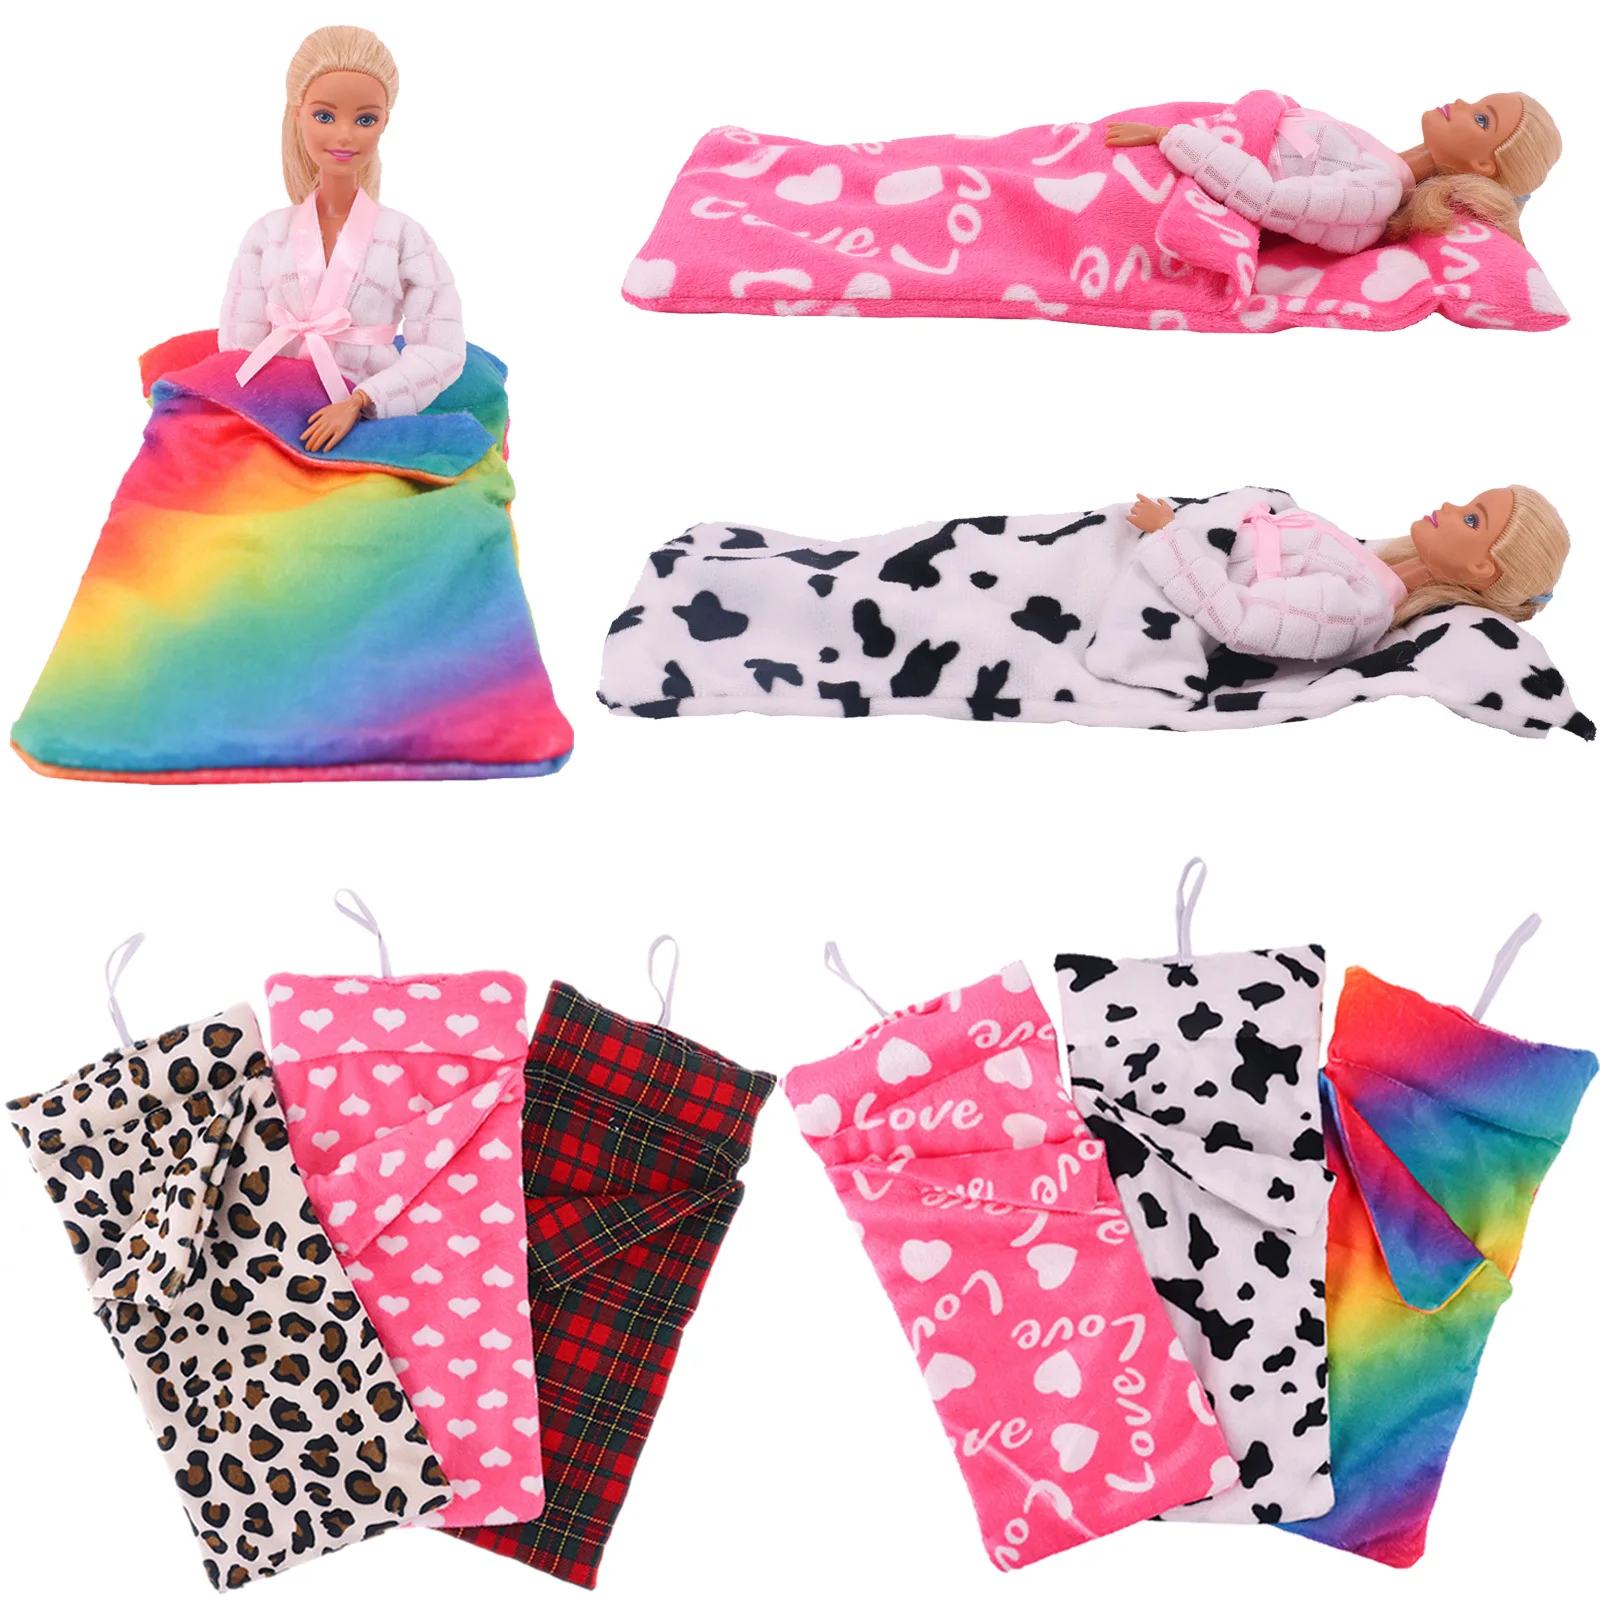 Doll House Accessories Barbies Sleeping Bag Christmas Accessory Multicolor Fashion Sleeping Bag Toy Gift For Barbies Elf Doll